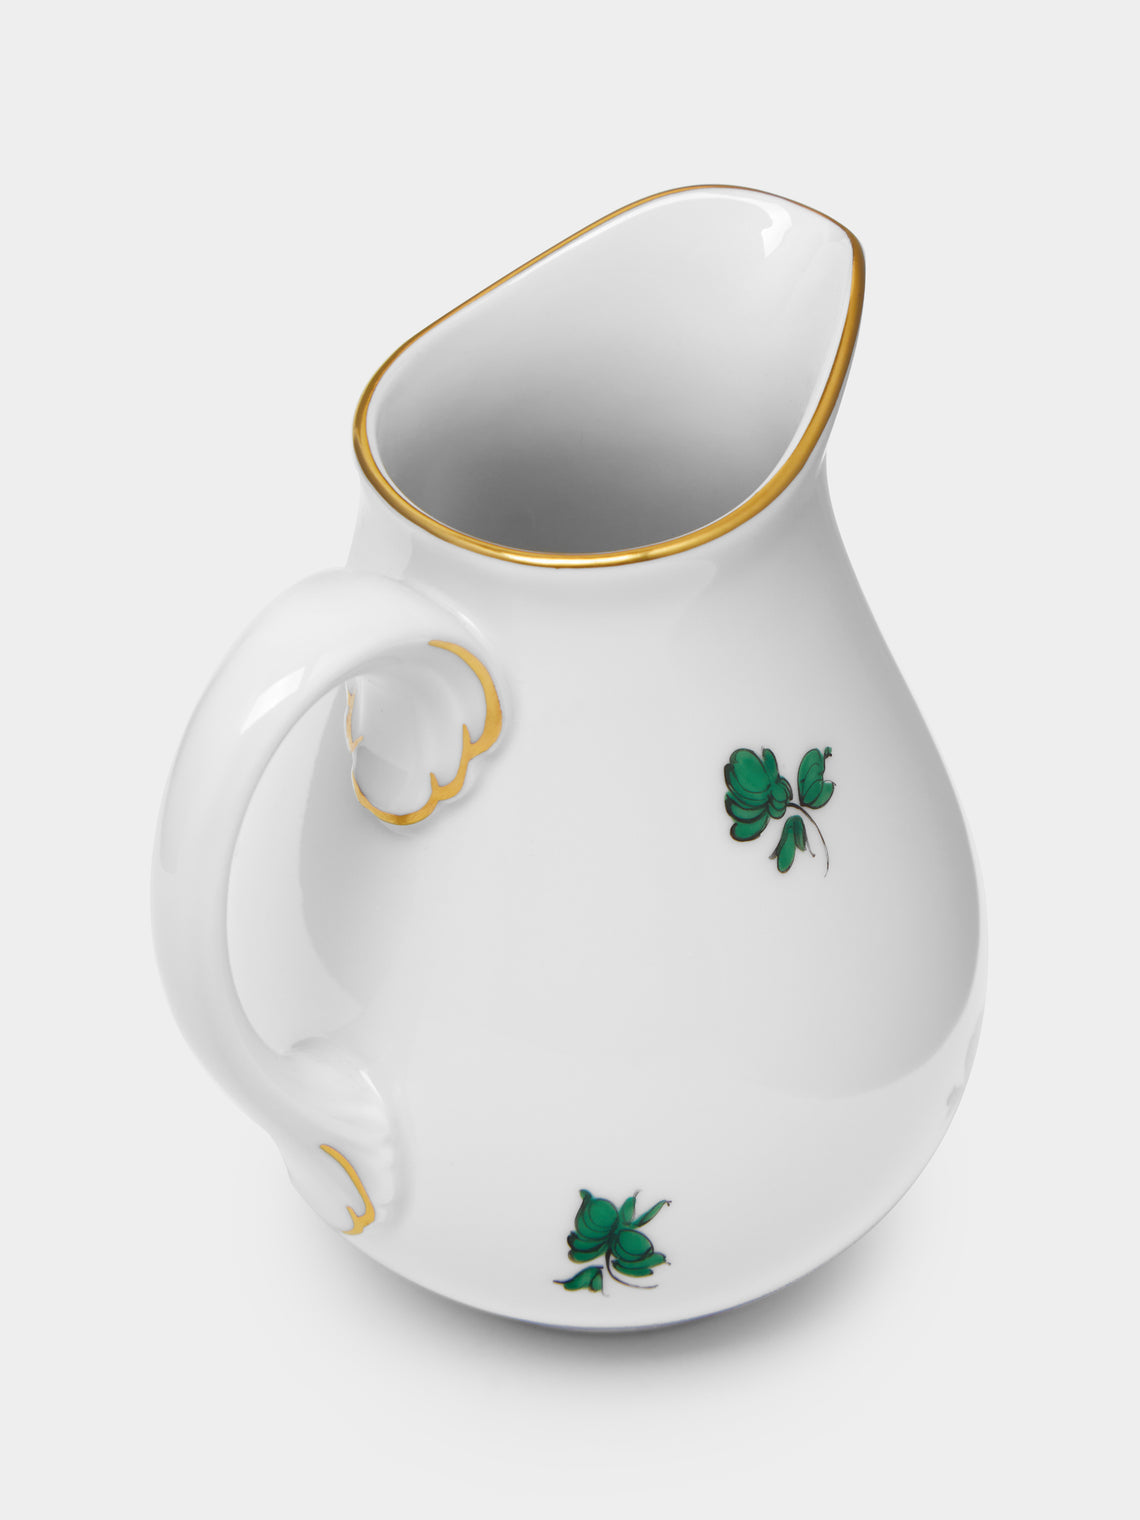 Augarten - Maria Theresia Hand-Painted Porcelain Creamer -  - ABASK